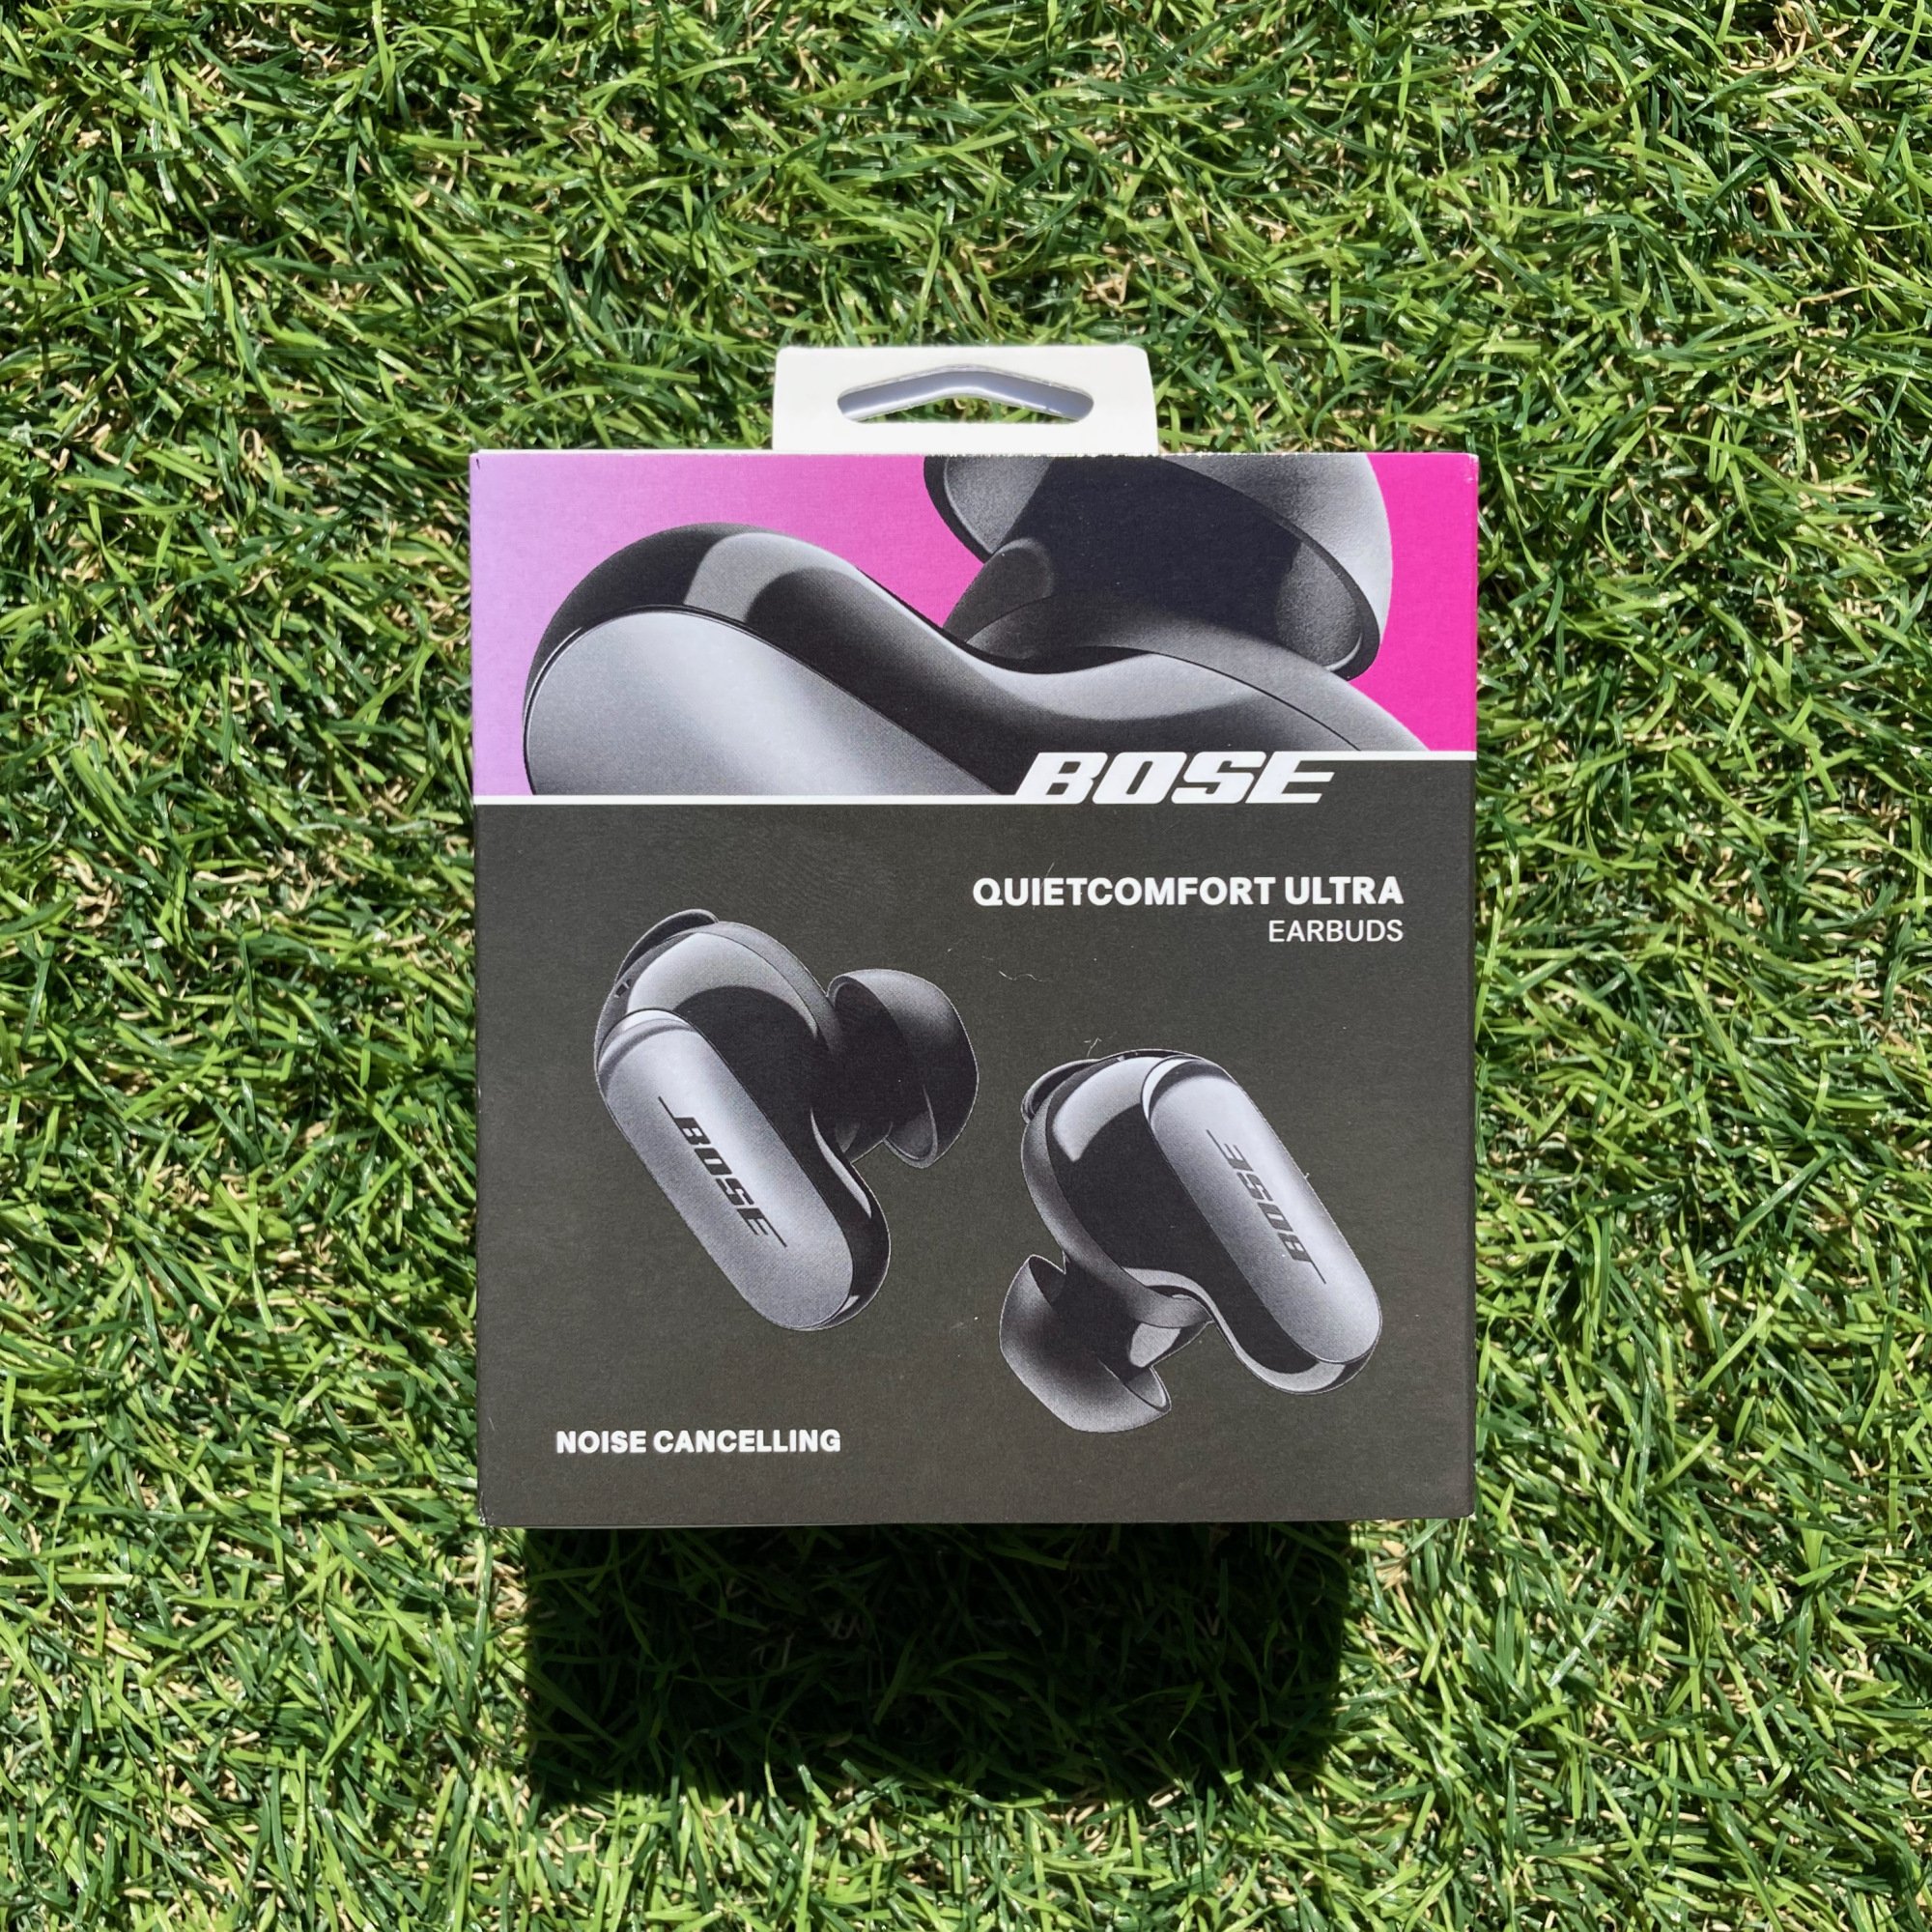 bose quietcomfort ultra earbuds in their packaging on artificial grass